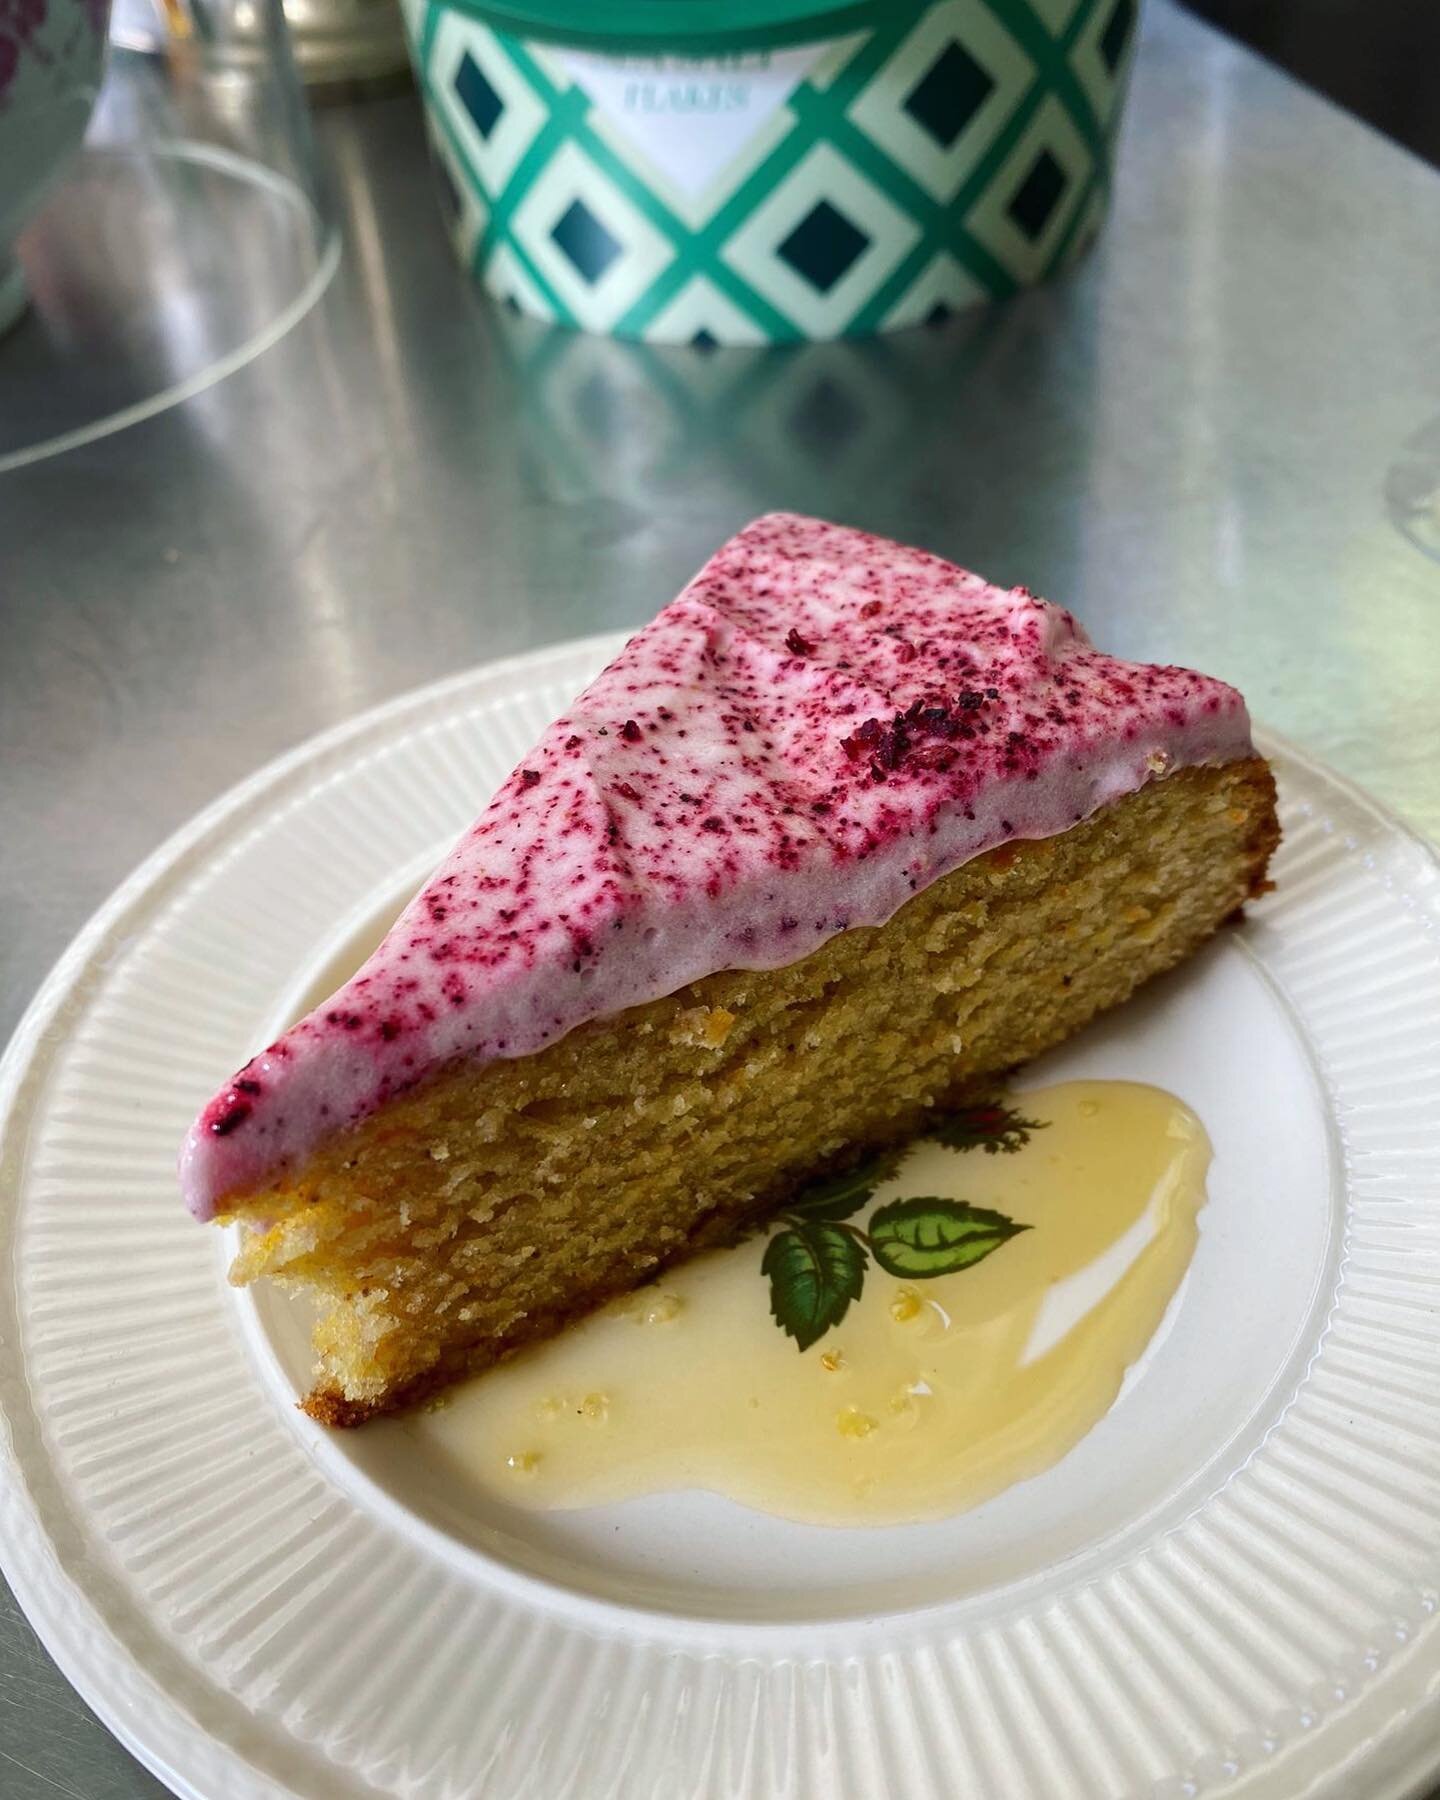 And this is the latest step in the continuing evolution of our orange + five spice cake, now with hibiscus cream cheese and star anise syrup (&euro;4)...next week we turn up the hibiscus knob to 11. #hibiscus #staranise #fivespice #cake